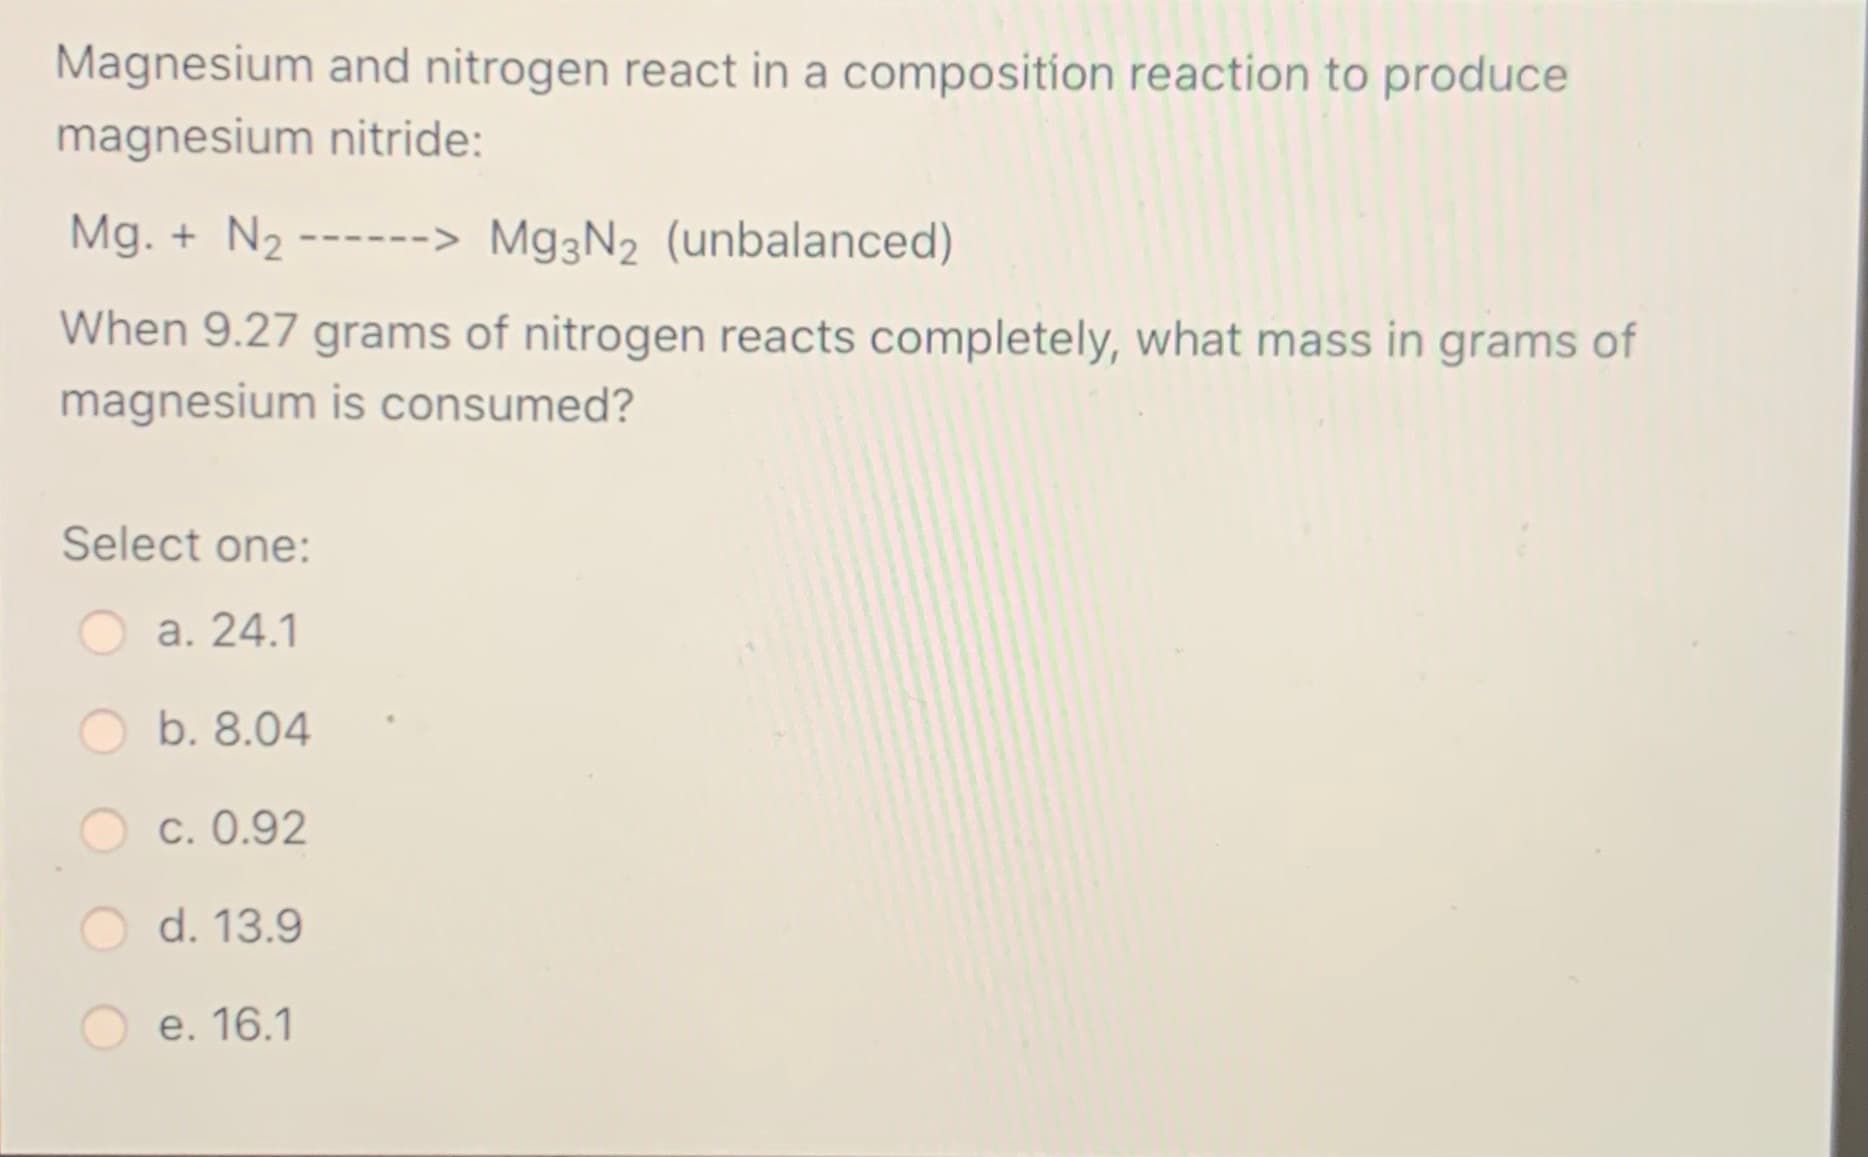 Magnesium and nitrogen react in a composition reaction to produce
magnesium nitride:
Mg. + N2
------> M93N2 (unbalanced)
When 9.27 grams of nitrogen reacts completely, what mass in grams of
magnesium is consumed?
Select one:
а. 24.1
b. 8.04
c. 0.92
d. 13.9
e. 16.1
